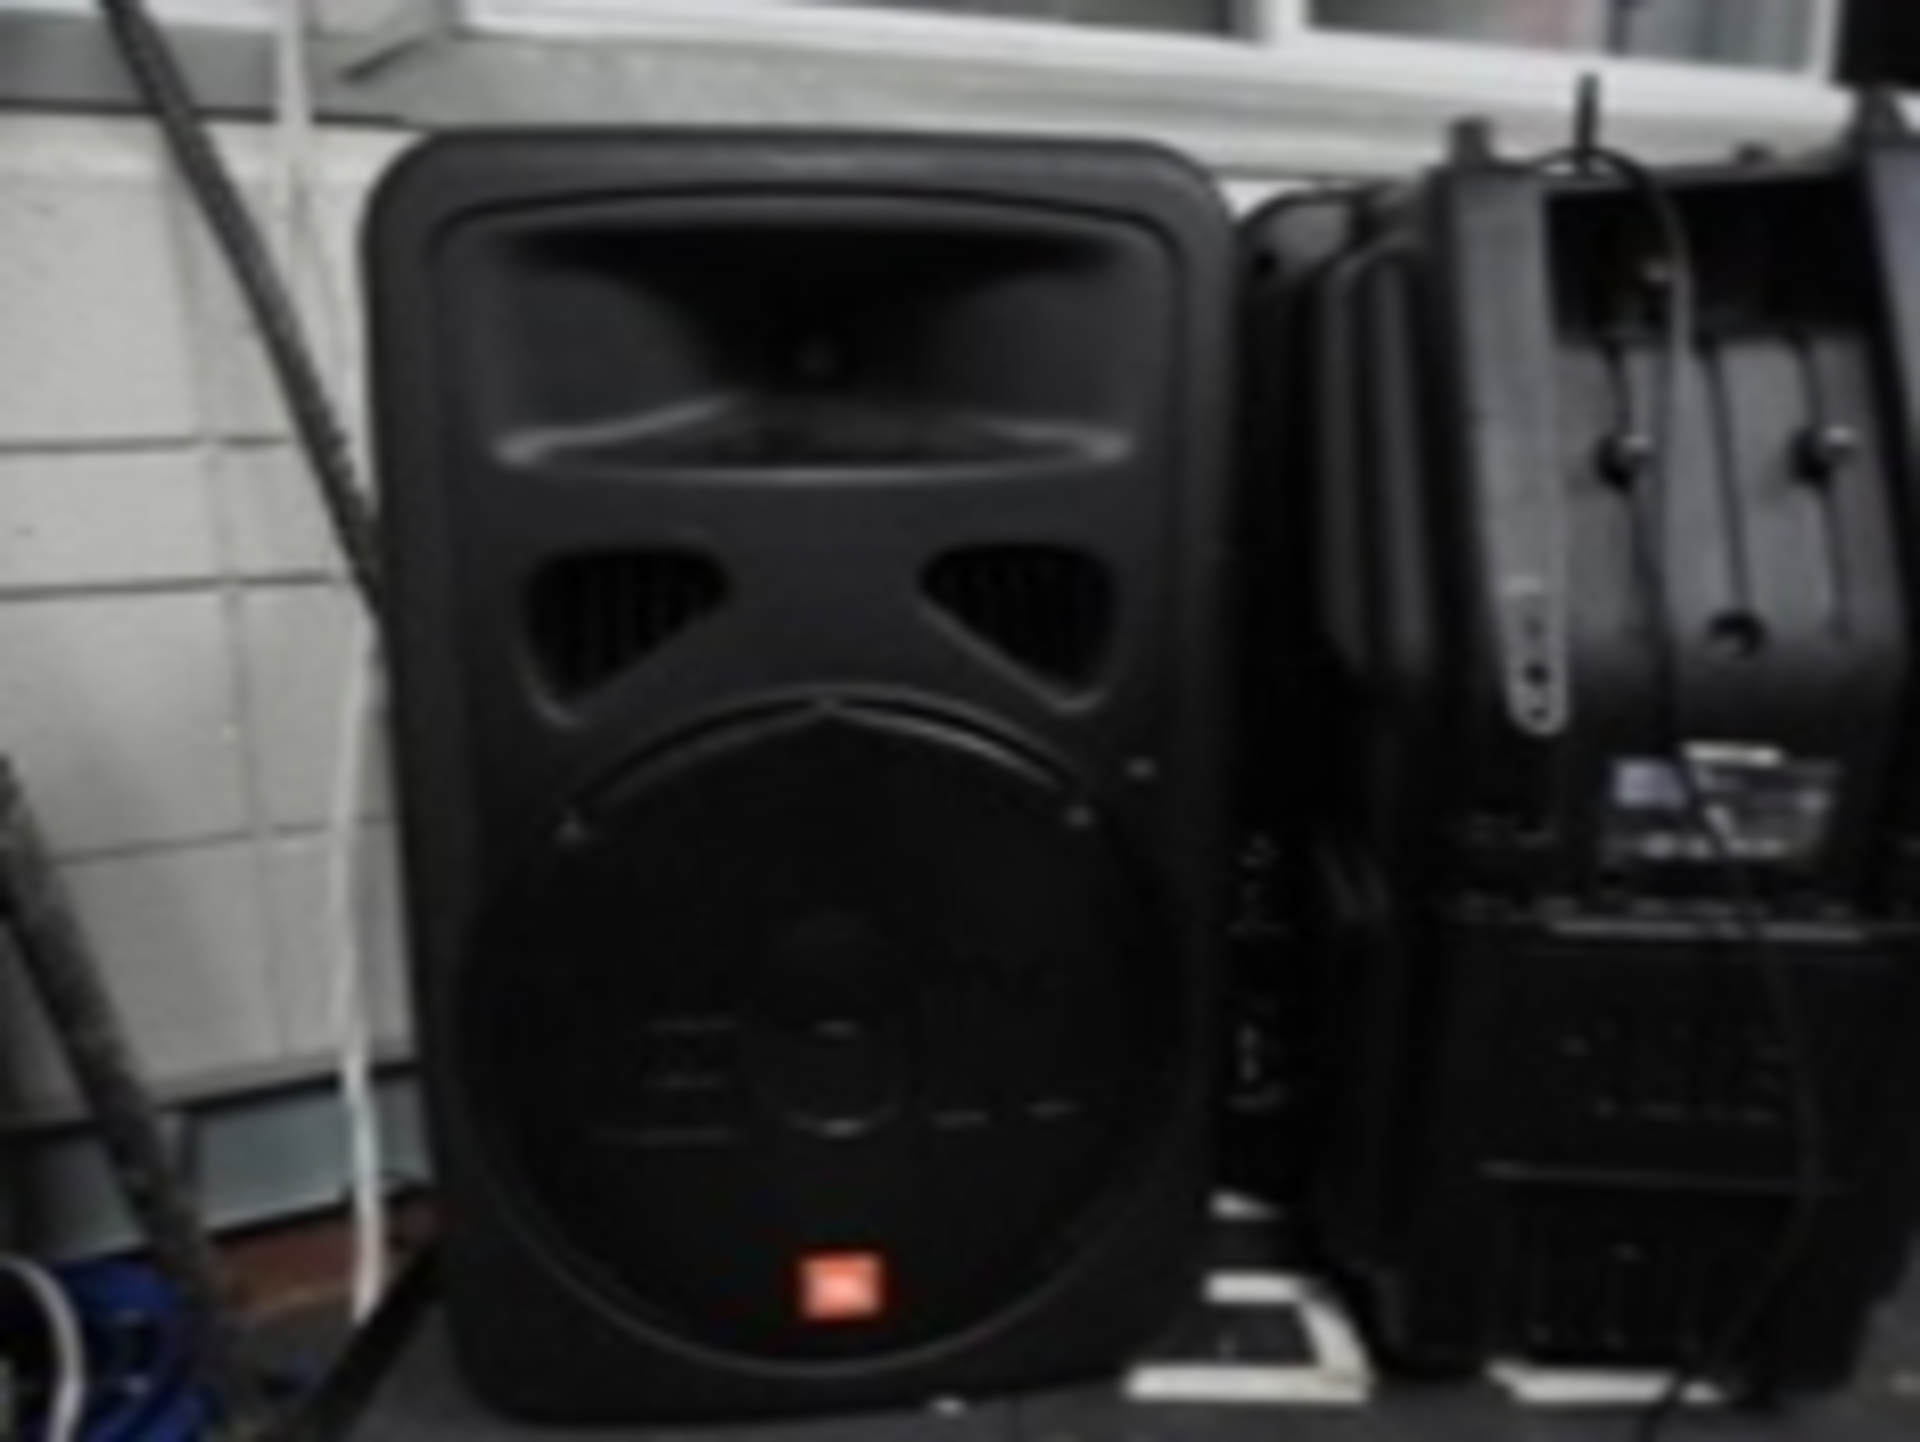 event speaker LOT OF: 3 qty: JBL speakers JBL EON 15 powered speaker Located: 4th floor ***NOTE from